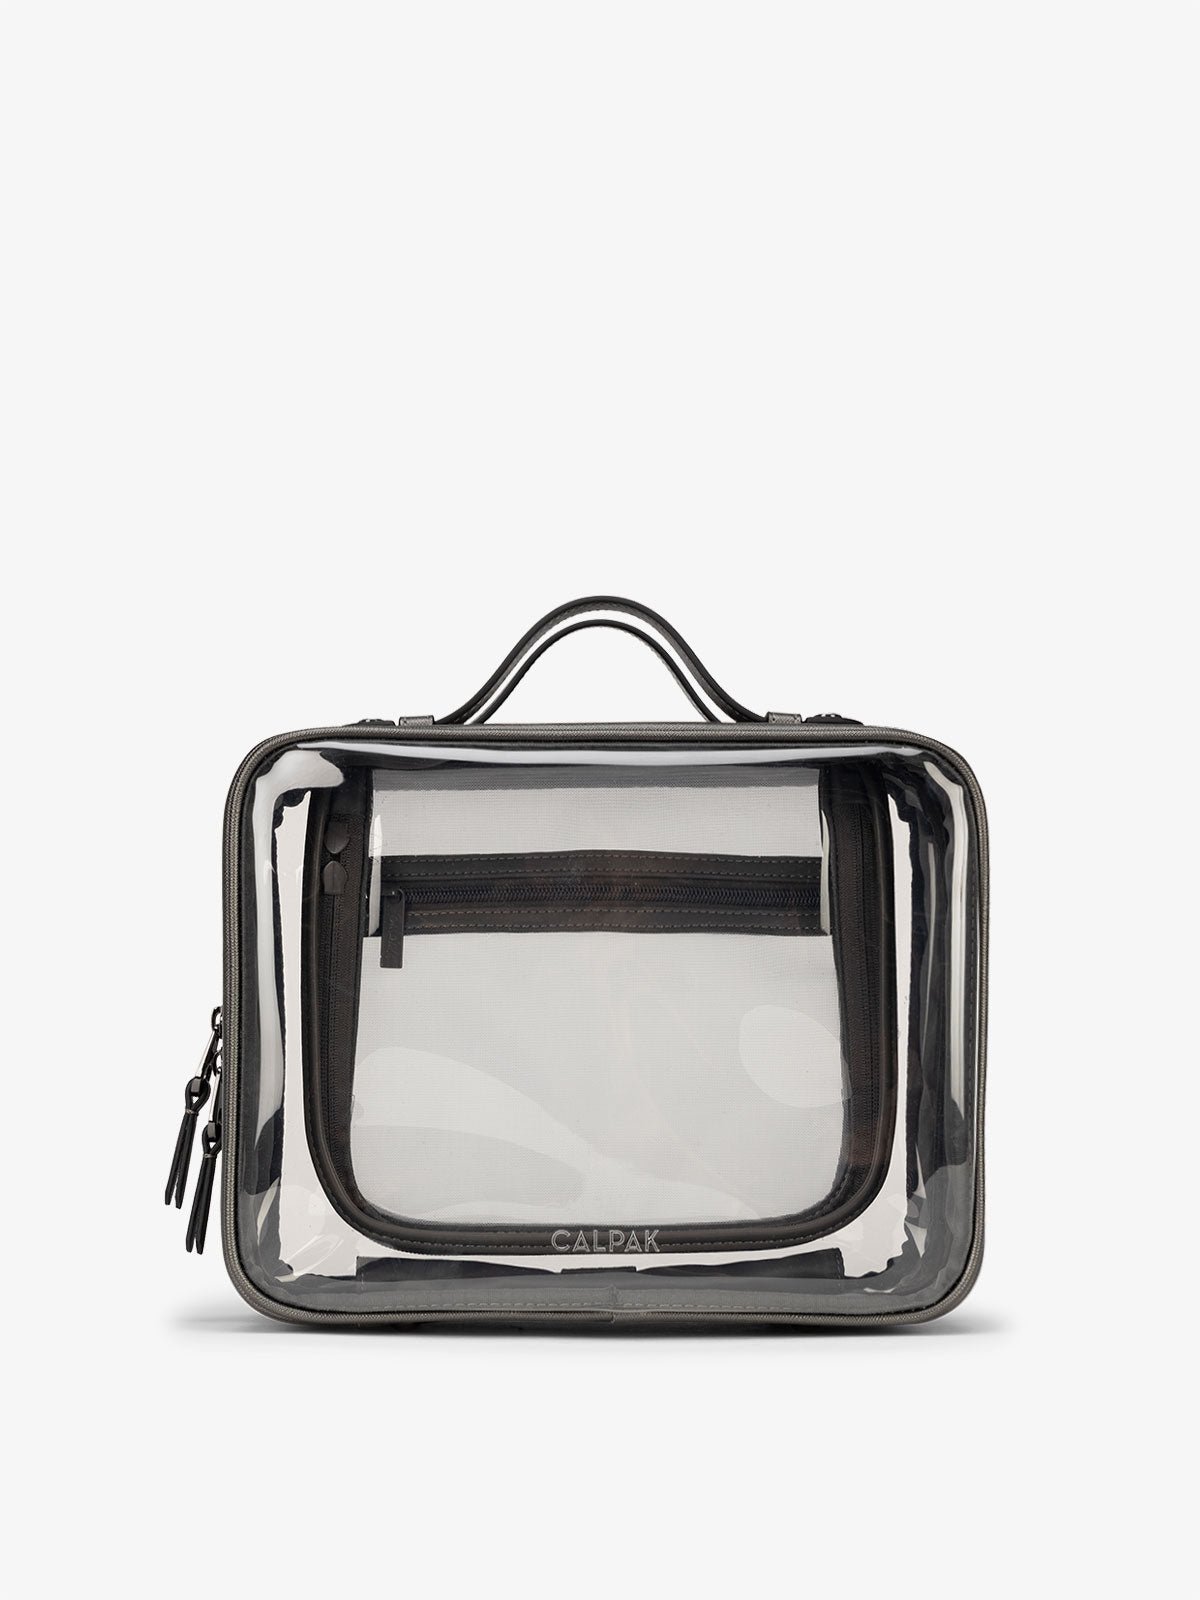 CALPAK Large clear makeup bag with zippered compartments in metallic steel